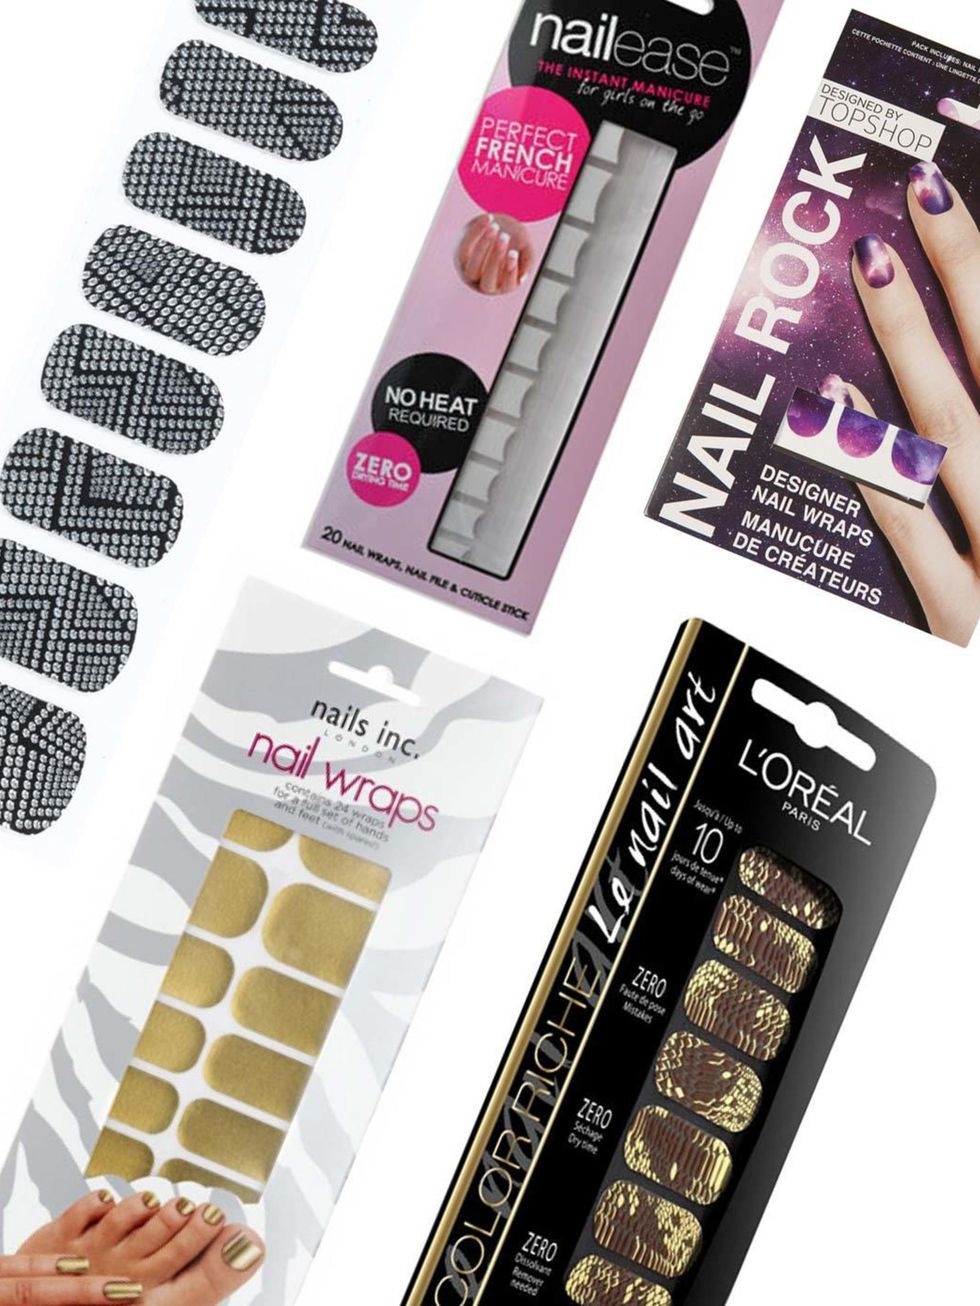 <p>We all love the look of freshly painted nails but sometimes the hassle, and the potential mess, is enough to put us off our usual manicure regime. Cue nail wraps, the lazy girls answer to perfect nails in an instant.</p><p>Now available in countless st